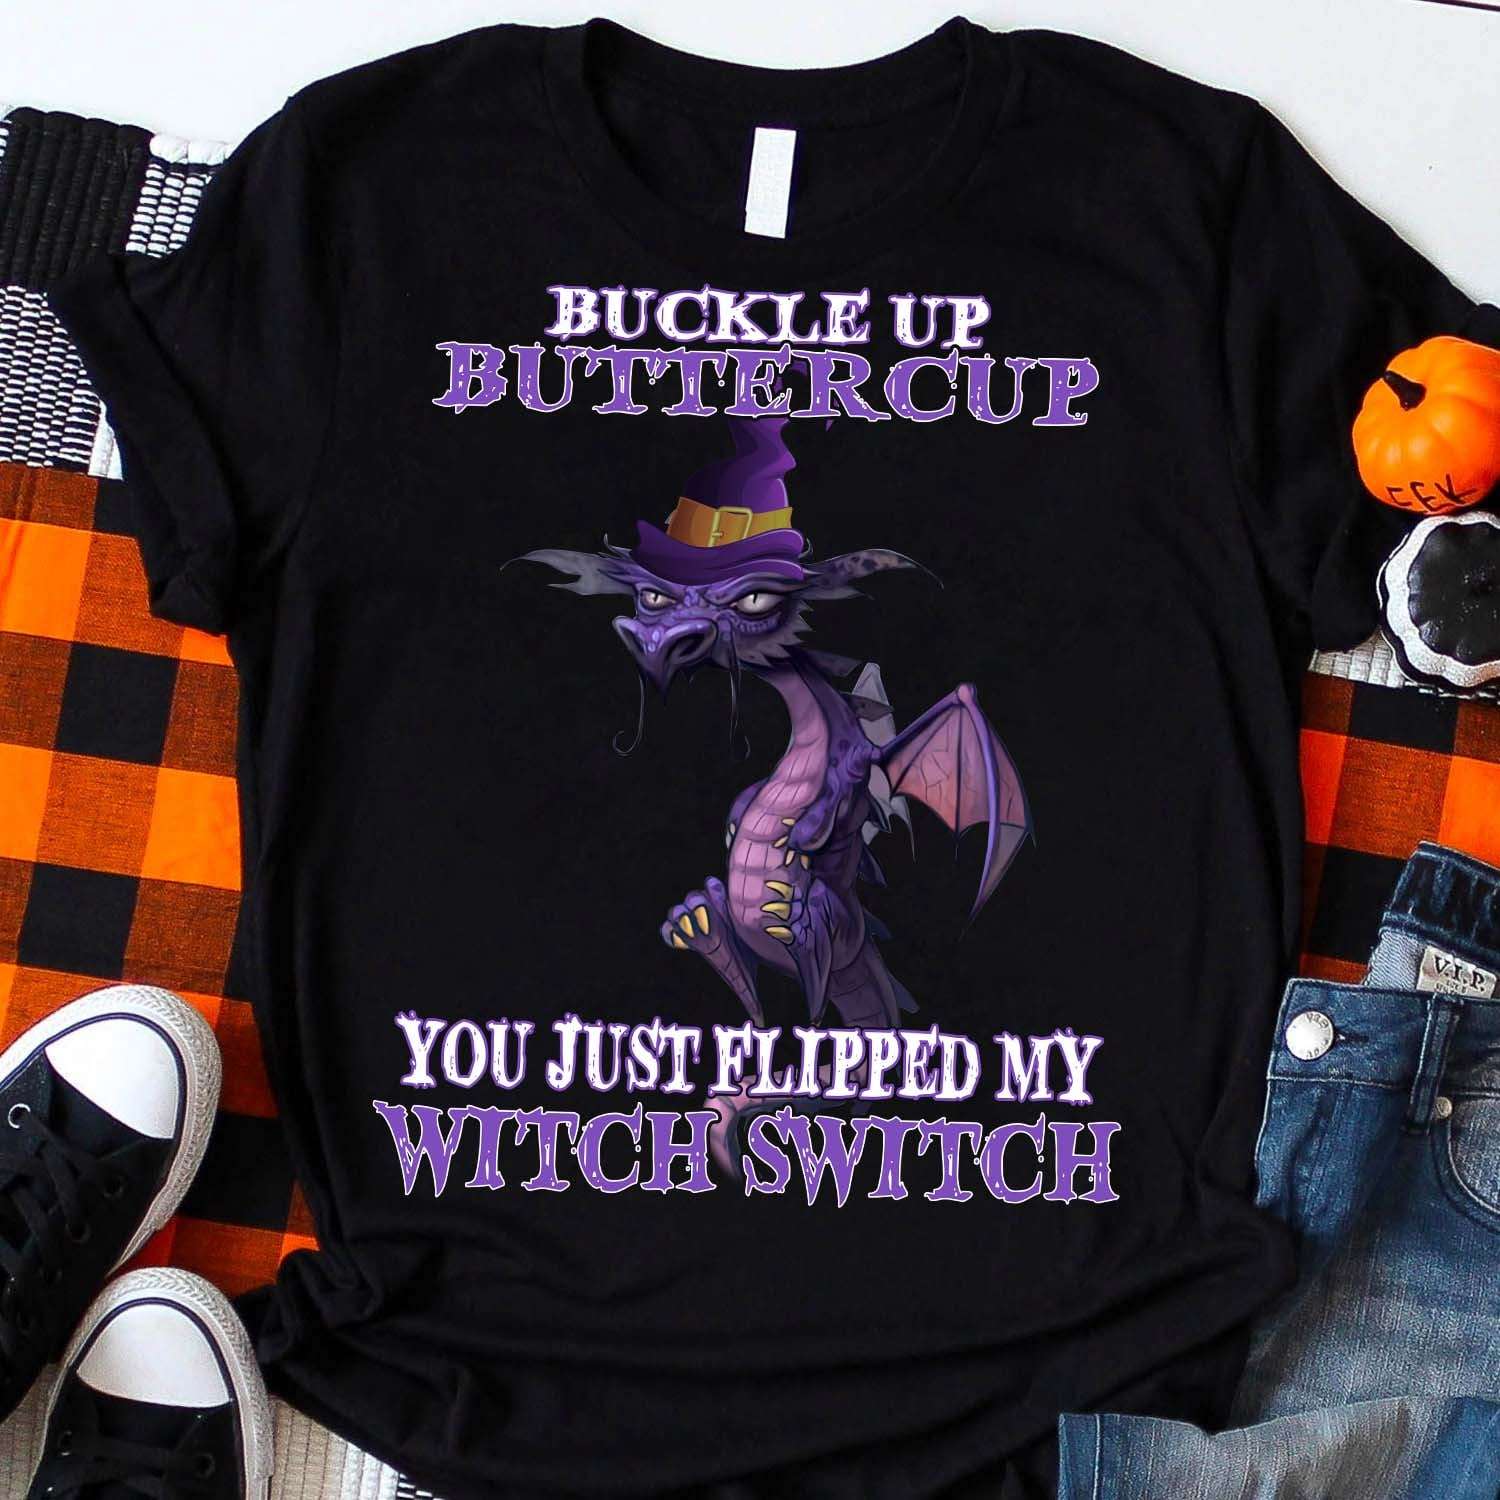 Buckle up buttercup you just flipped my witch switch - Dragon witch, Halloween witch costume